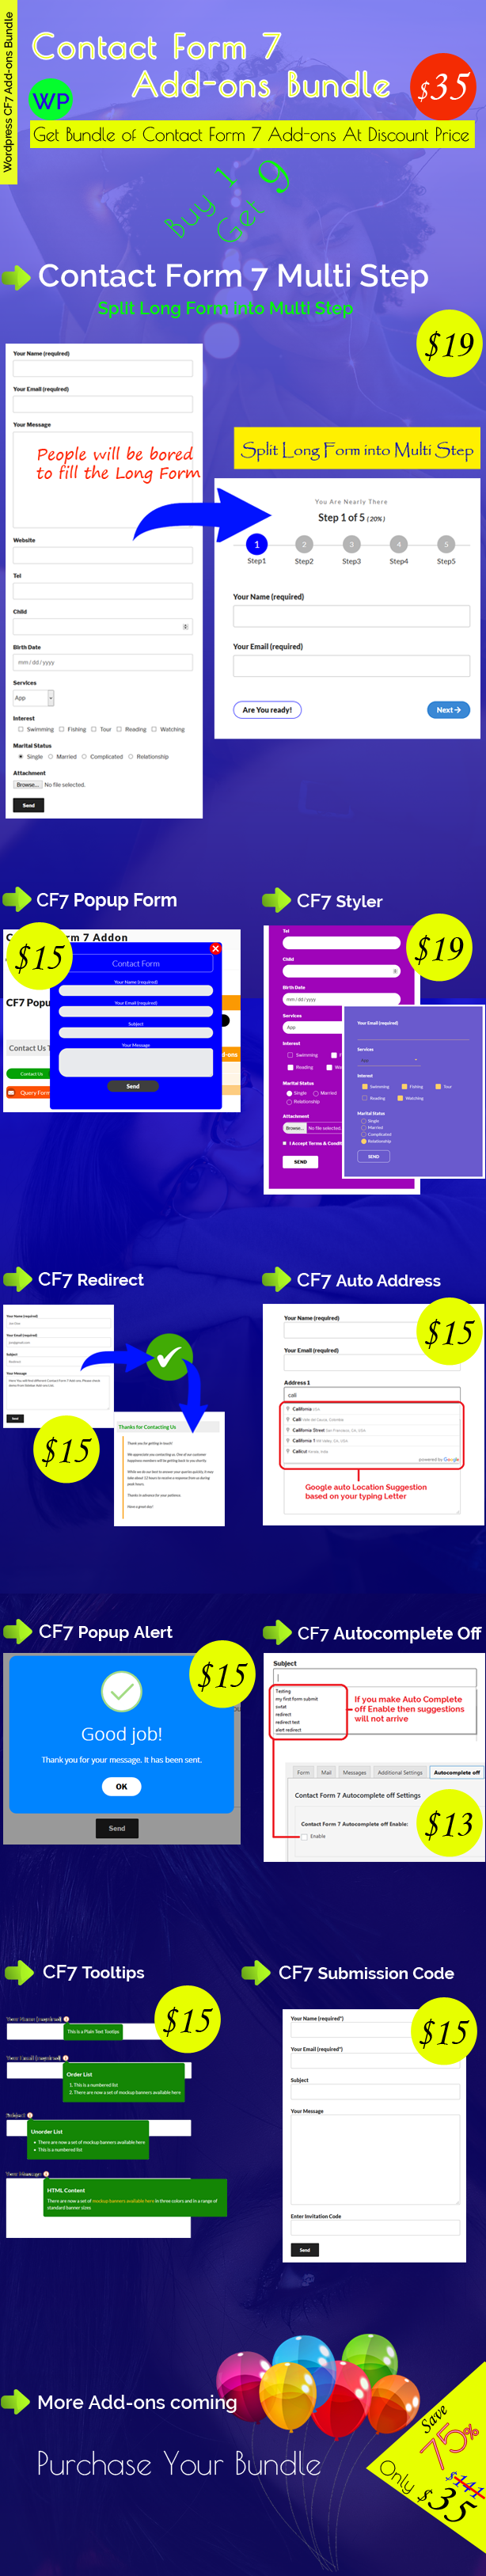 contact-form-7-plugin-add-ons-bundle